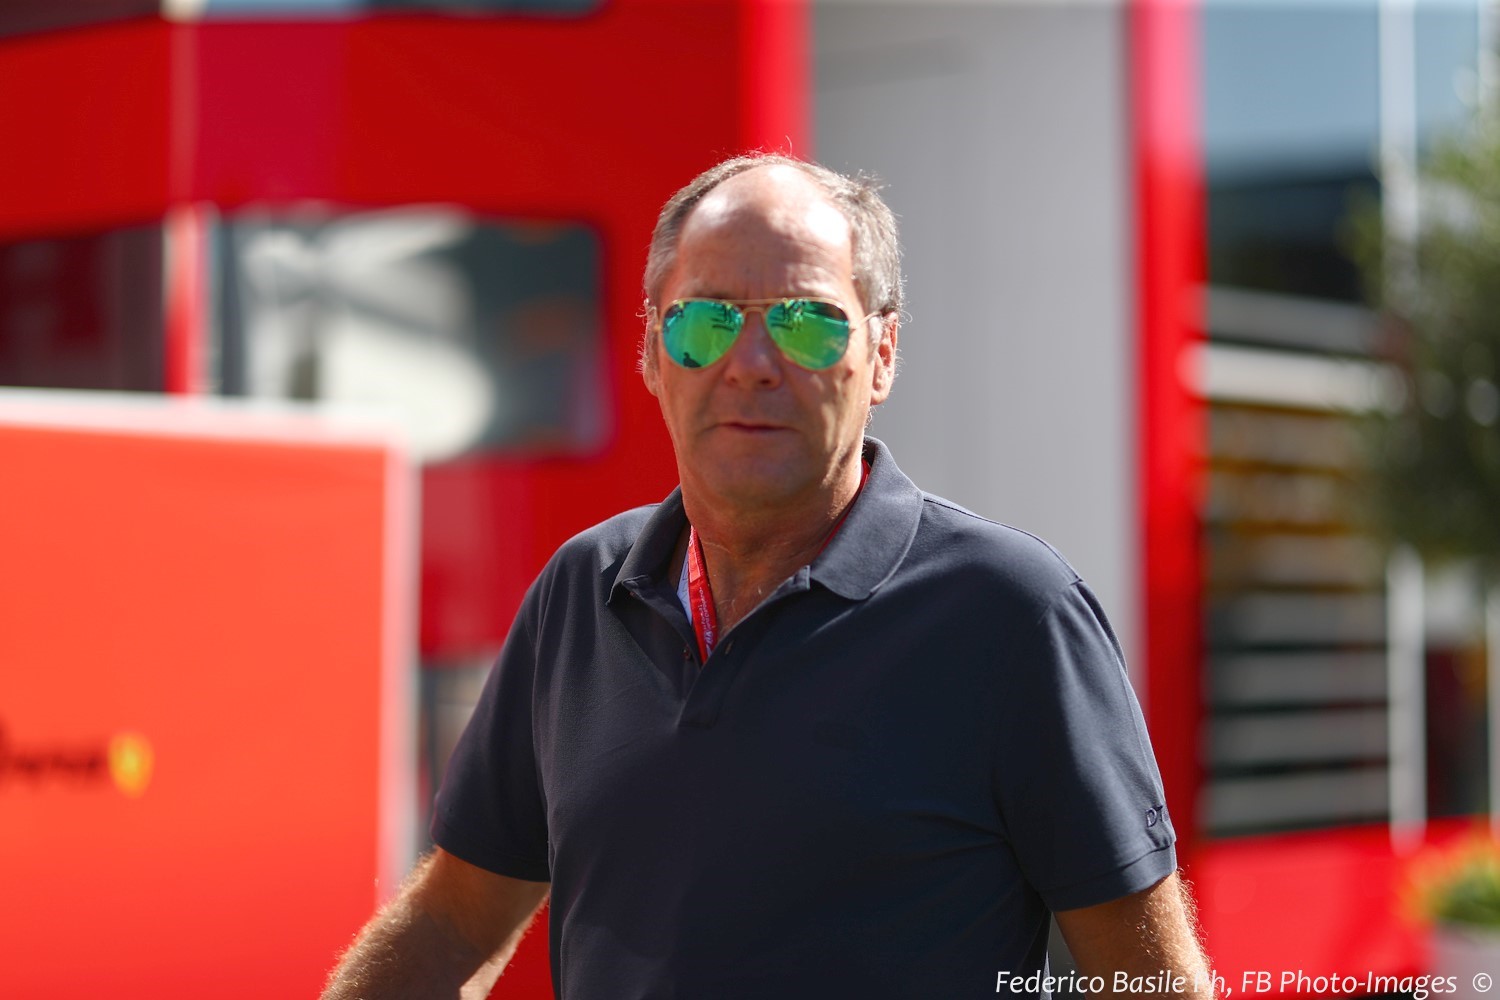 Gerhard Berger knows F1 is 99% car and 1% driver